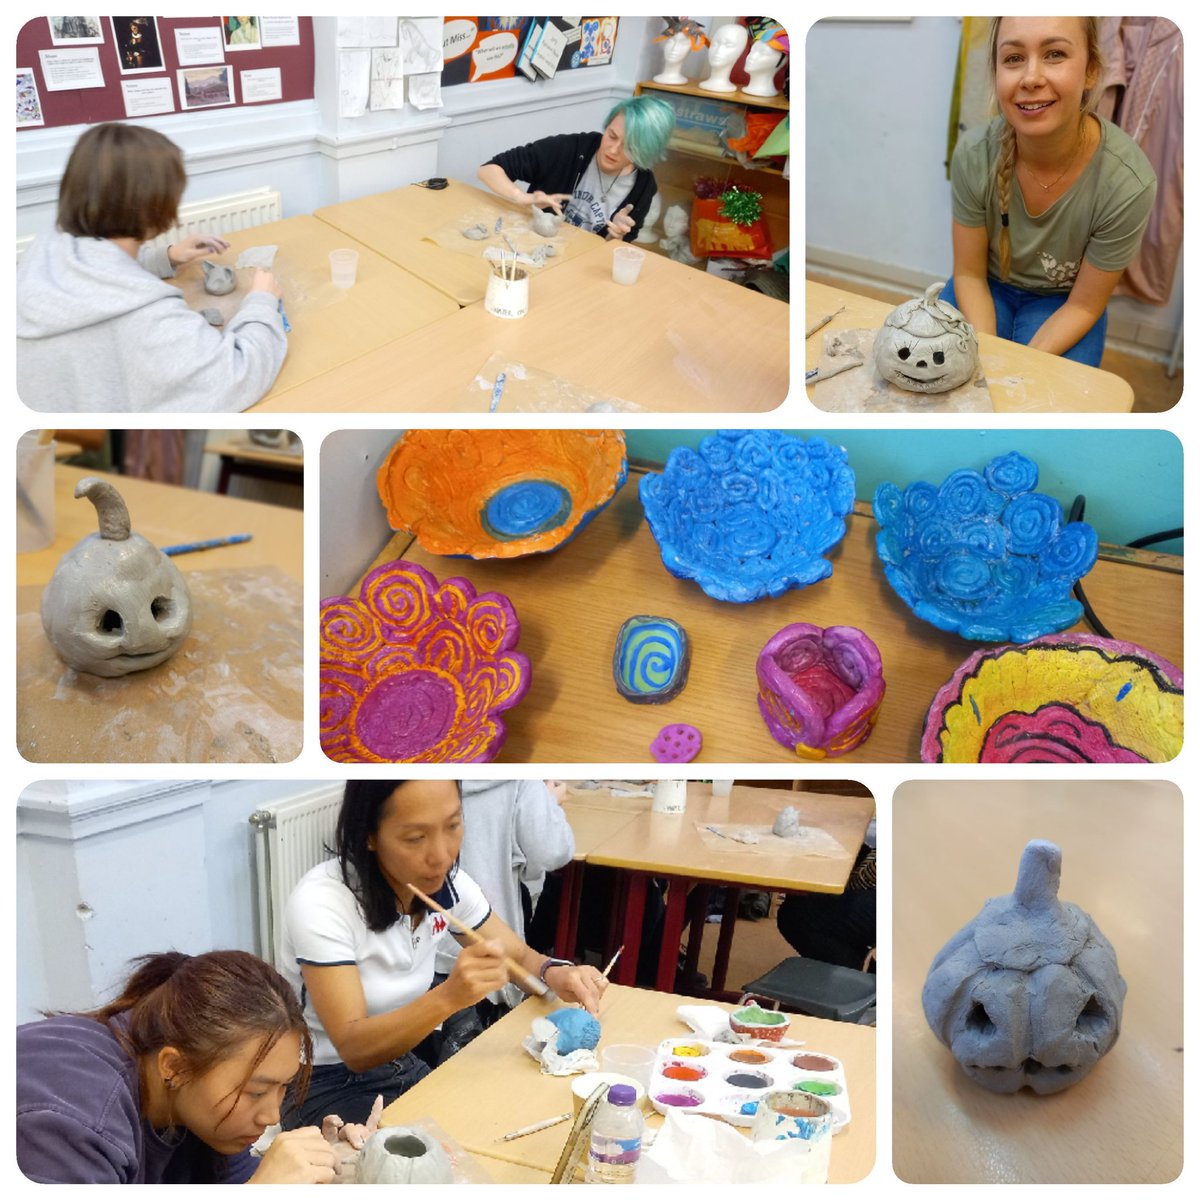 Another fantastic evening with @HyndlandSec families & Ms Macallan @HyndlandArtDept as part of our family learning programme. Tonight we finished working on clay bowls & making some Halloween characters 🎃 @FARE_Scotland @FareJenny @Jimmy_FARE @paul_fare